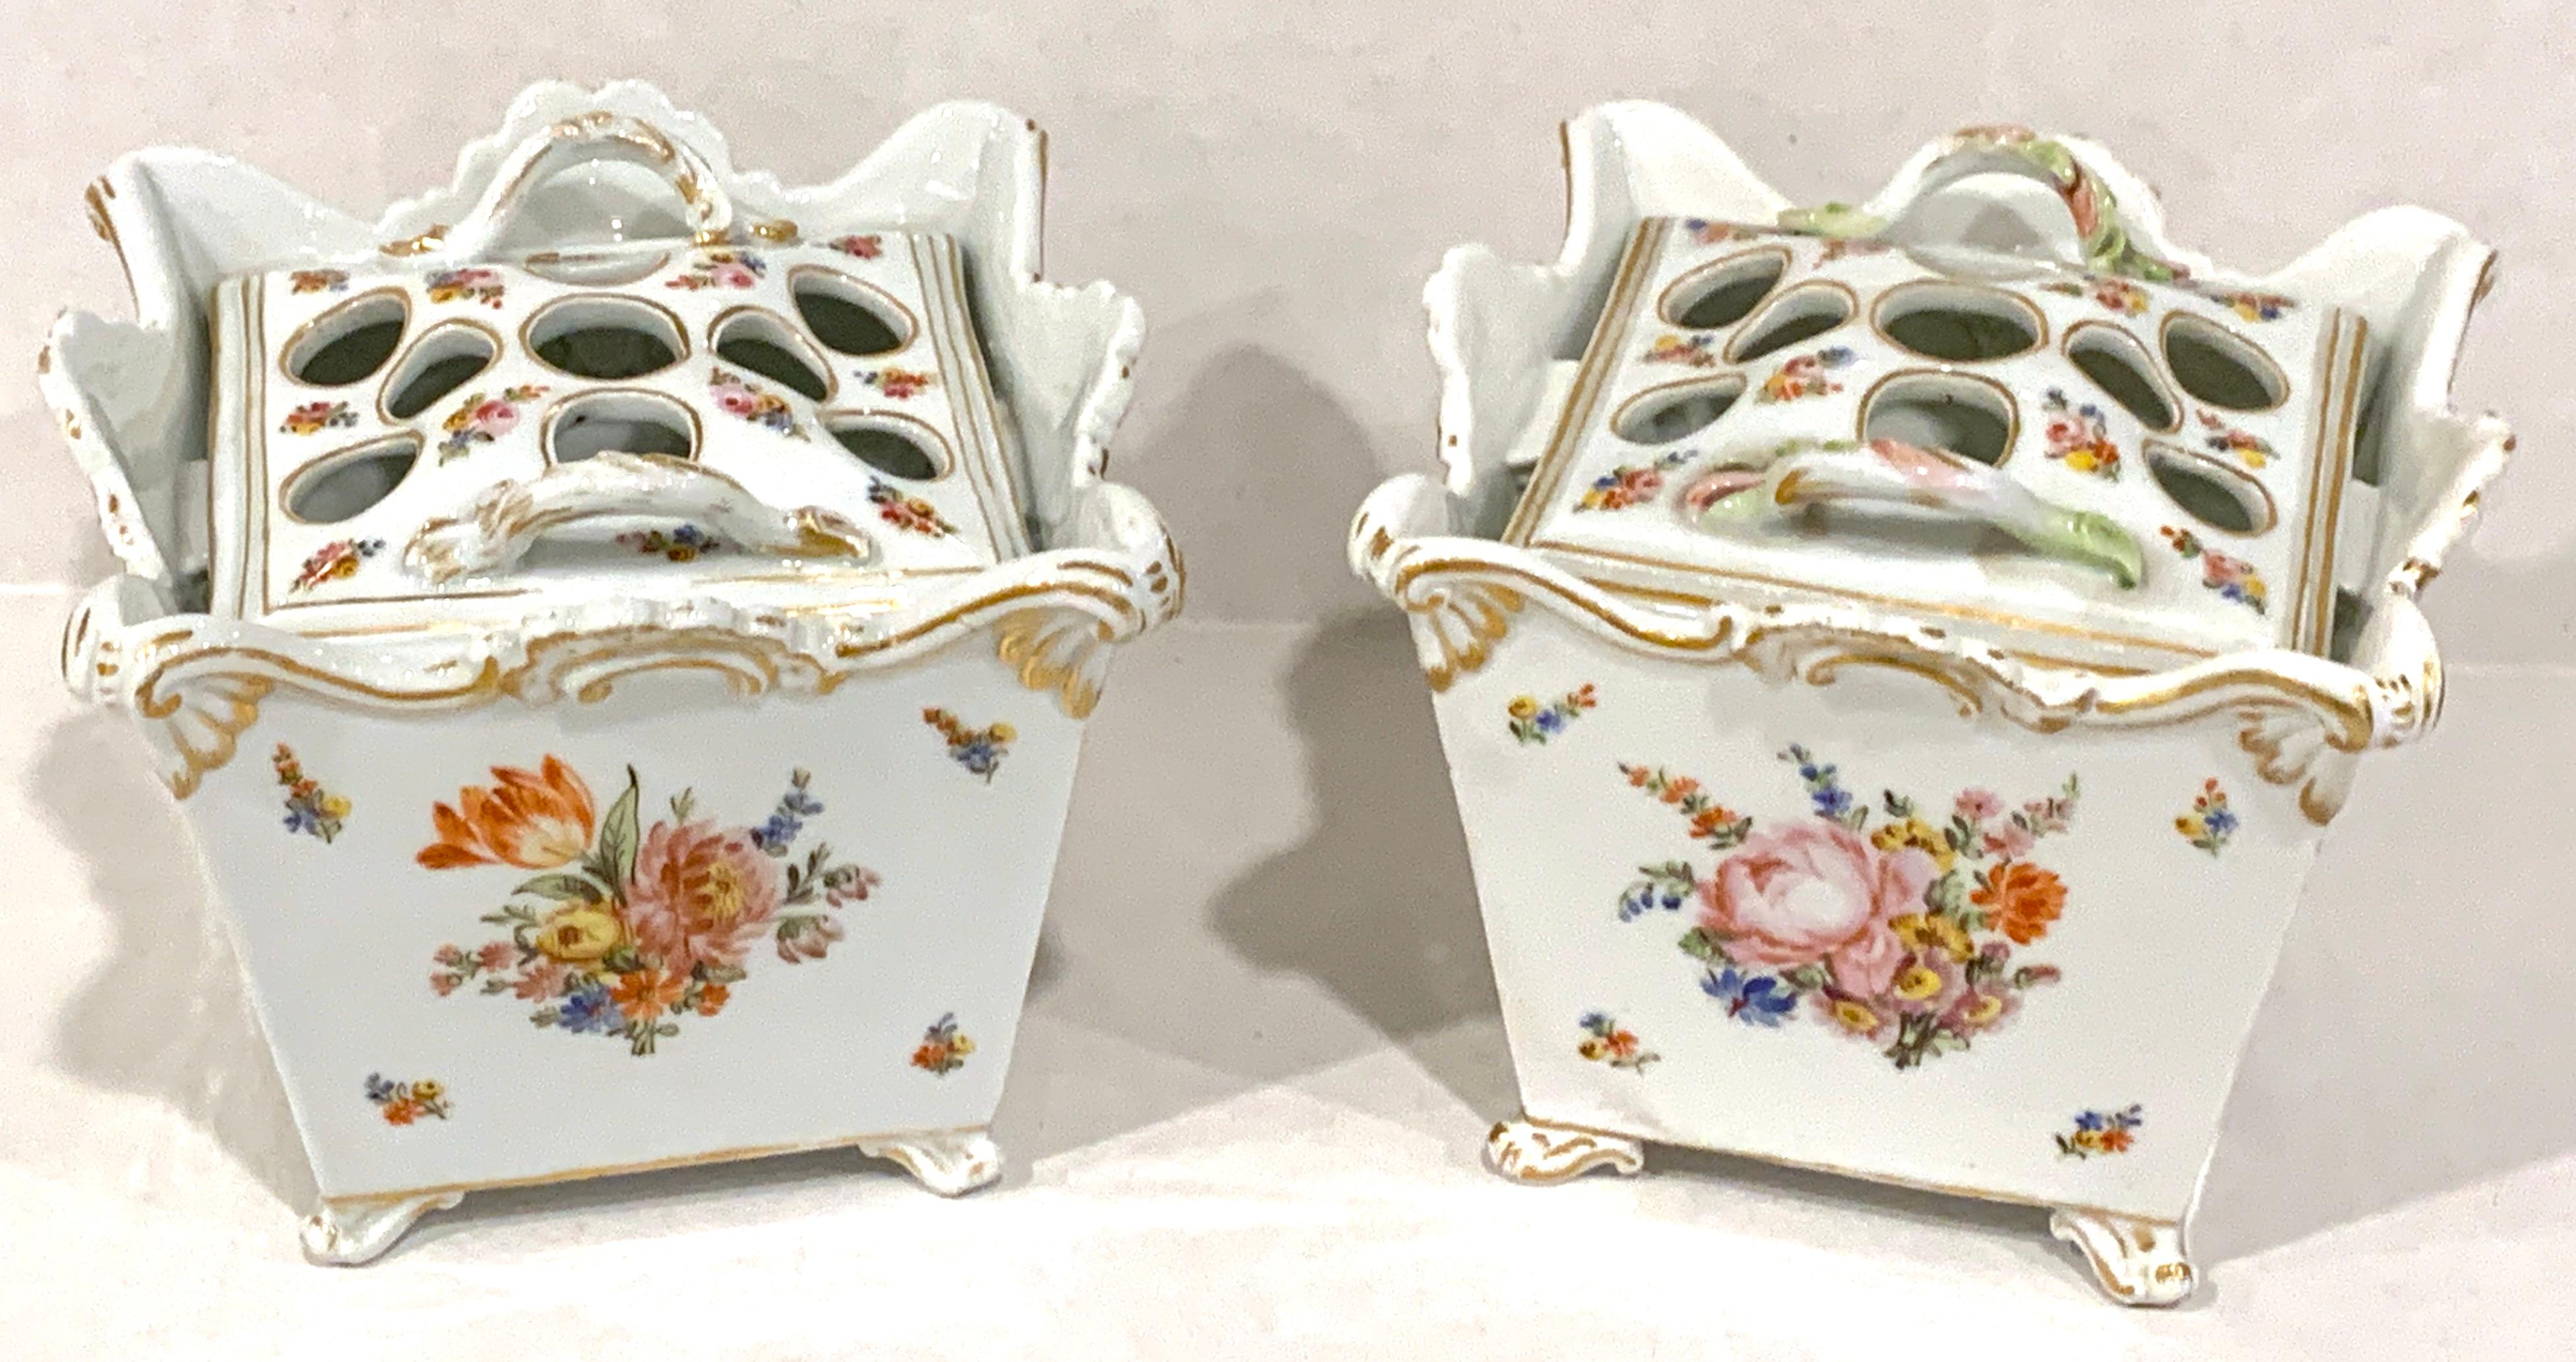 Hand-Painted Pair of Marcolini Meissen Tulipiers, 1774-1814